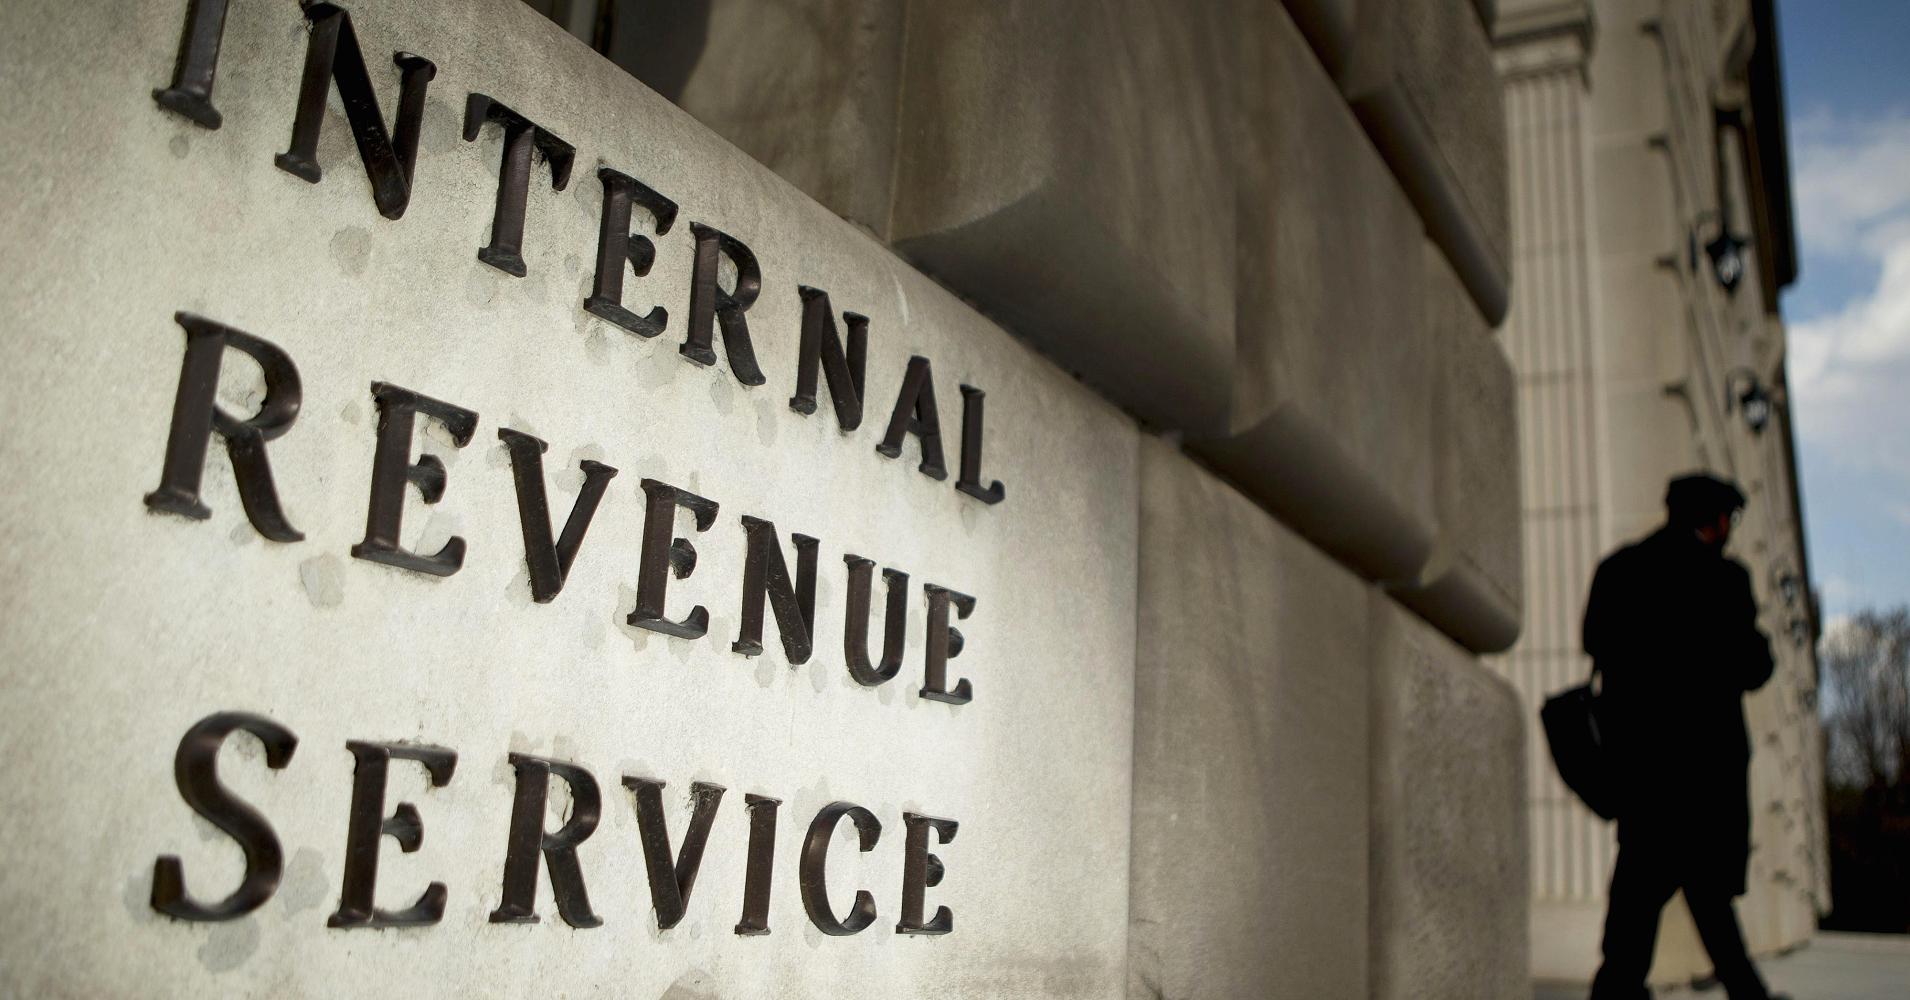 Federal judge makes it official: The IRS is an ‘untrustworthy’ rogue agency that targets political enemies of the administration